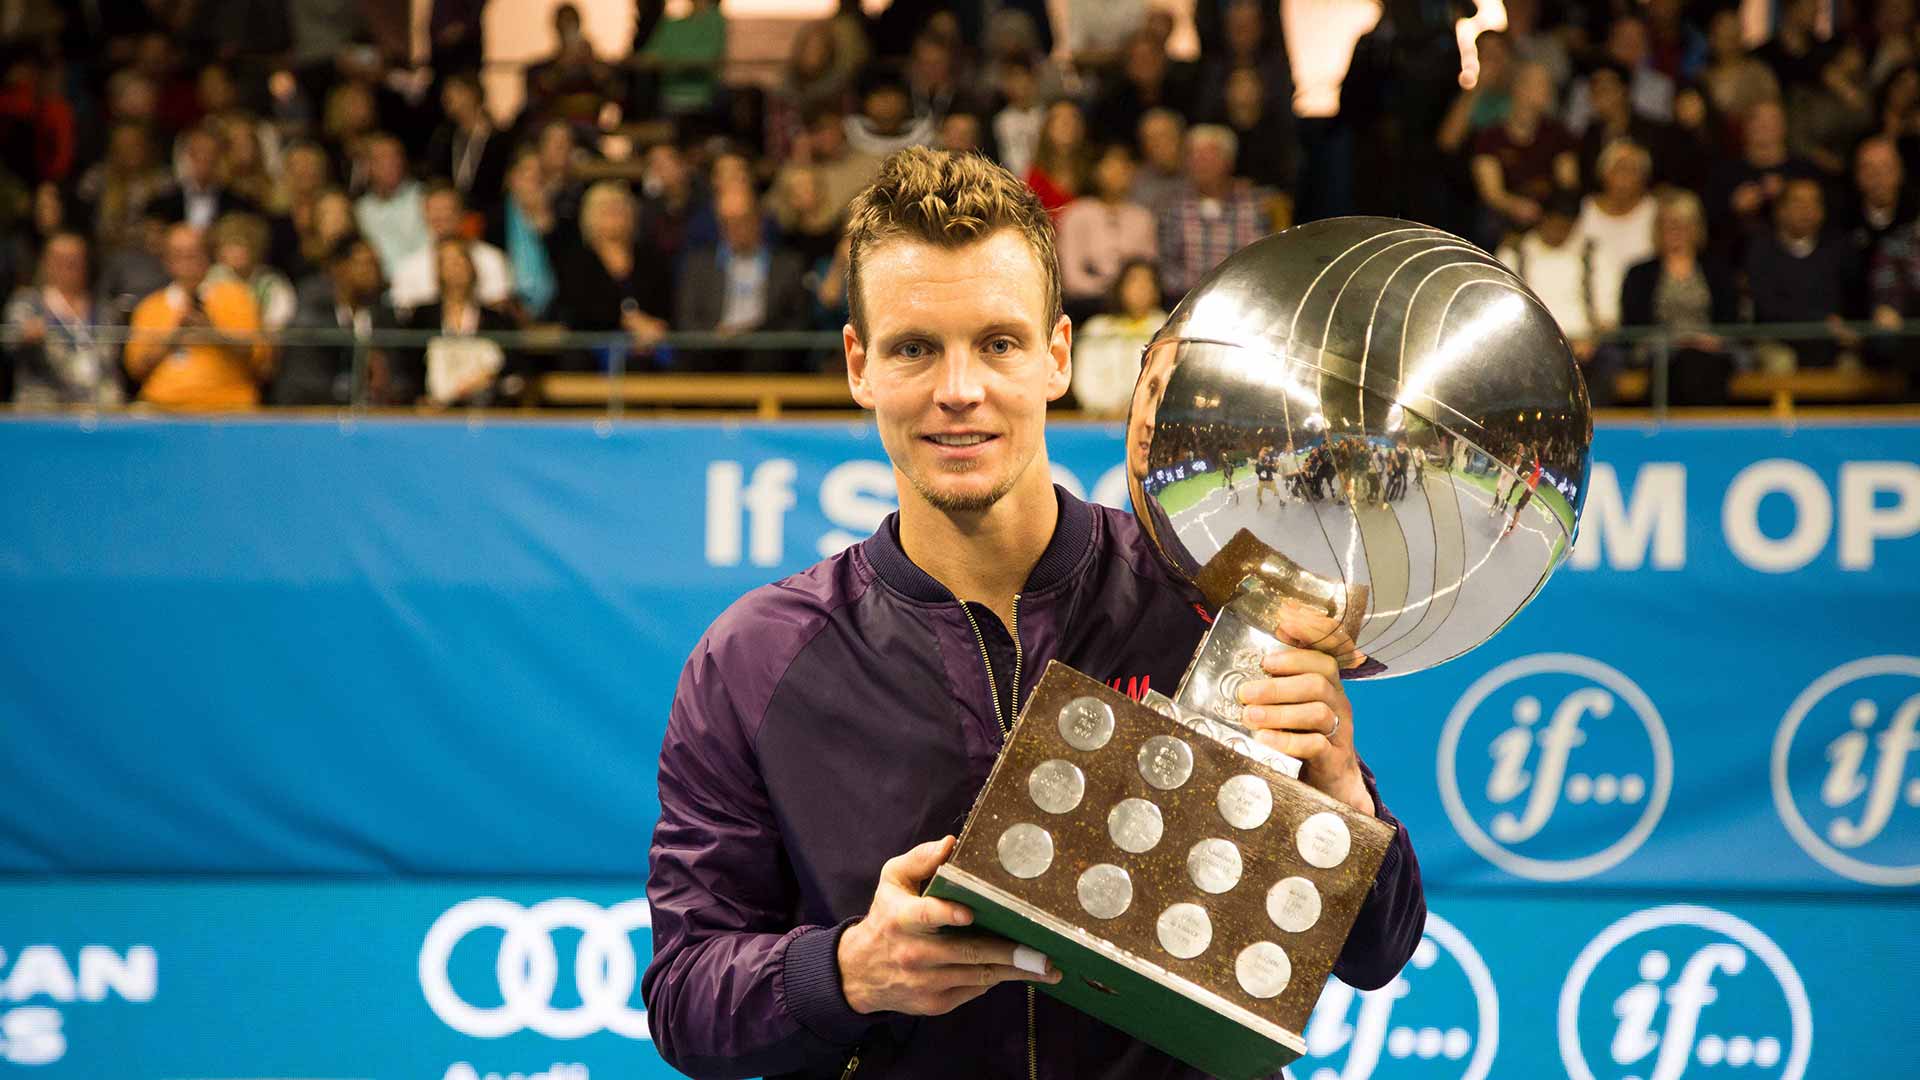 Berdych Secures Third Stockholm Title